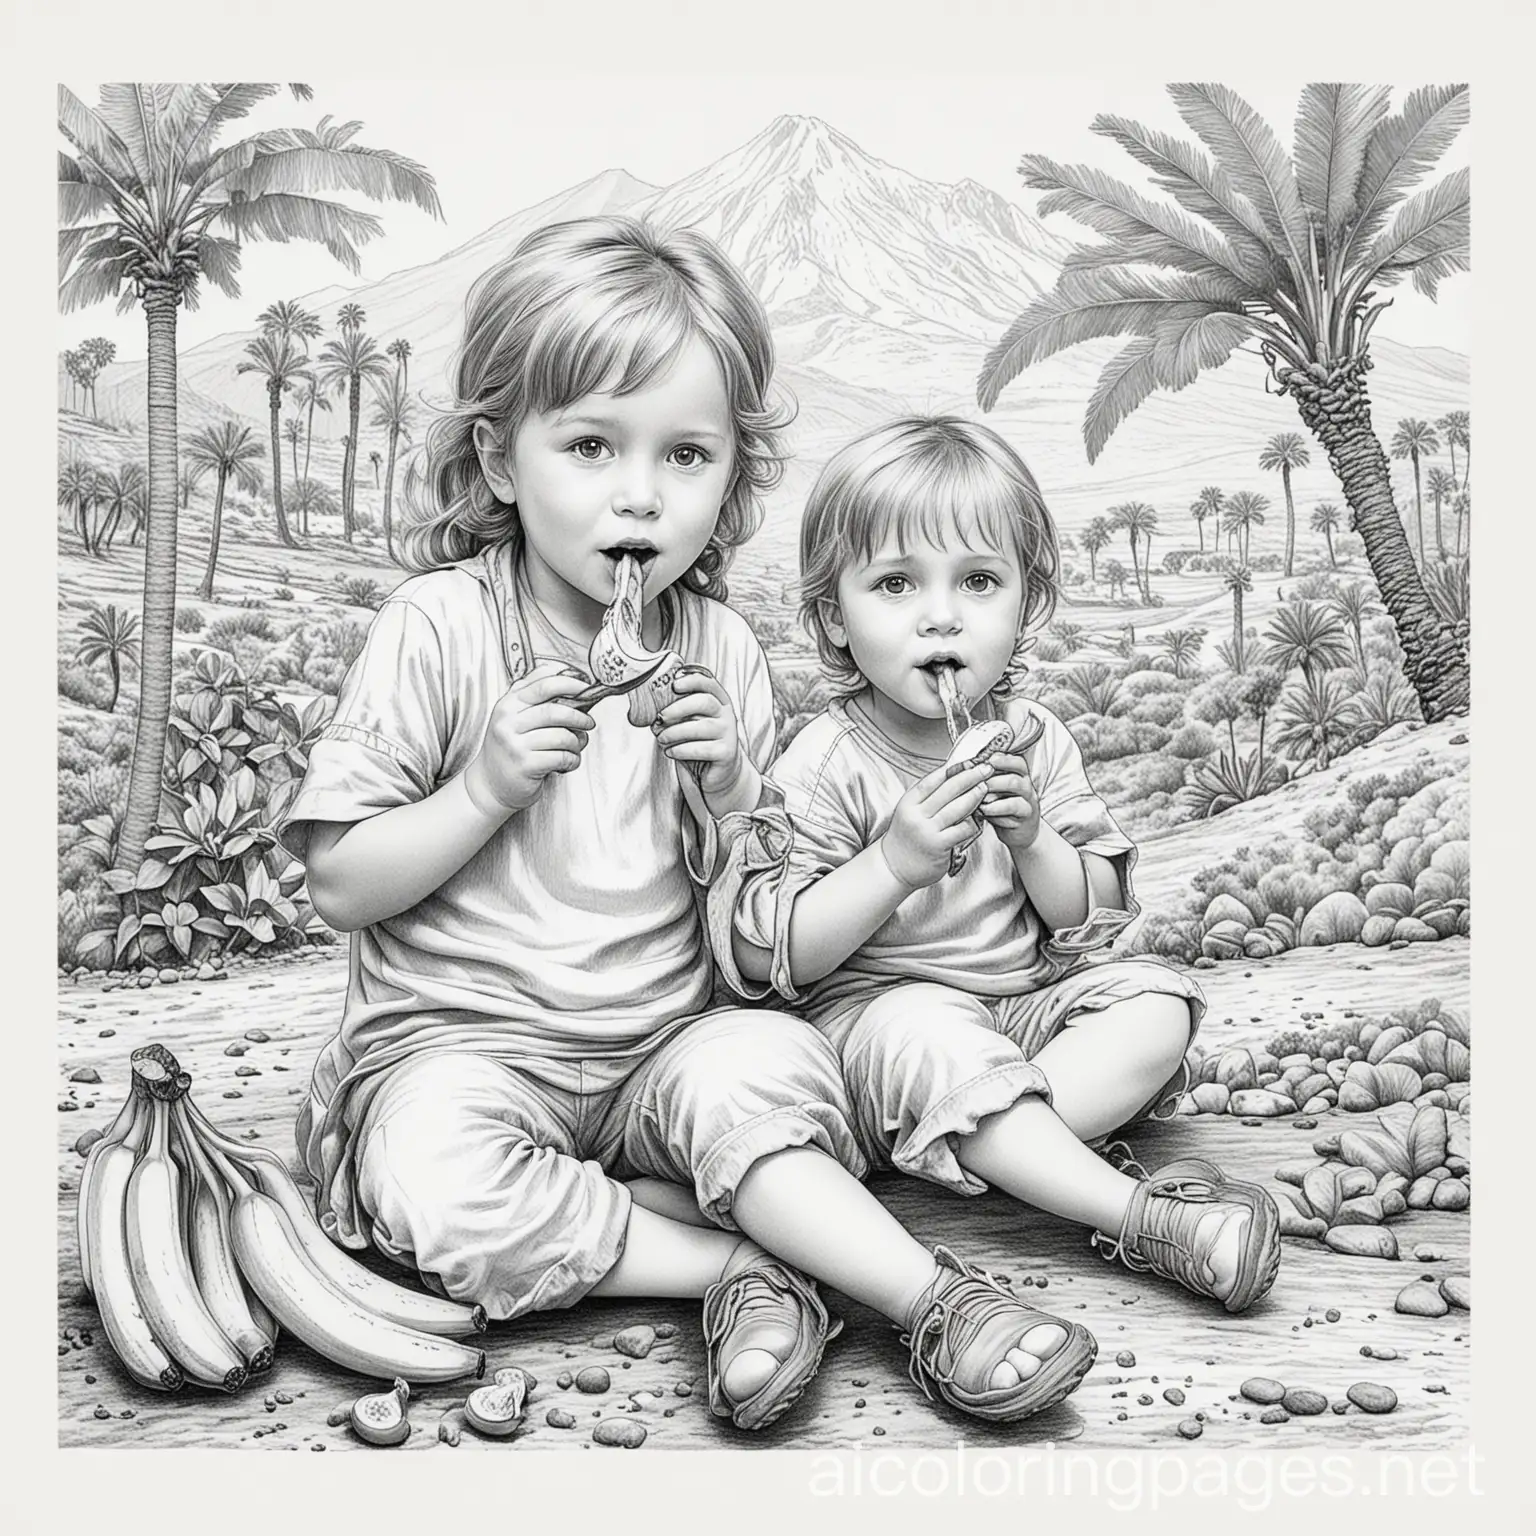 drawing of children eating bananas in teide, Coloring Page, black and white, line art, white background, Simplicity, Ample White Space. The background of the coloring page is plain white to make it easy for young children to color within the lines. The outlines of all the subjects are easy to distinguish, making it simple for kids to color without too much difficulty